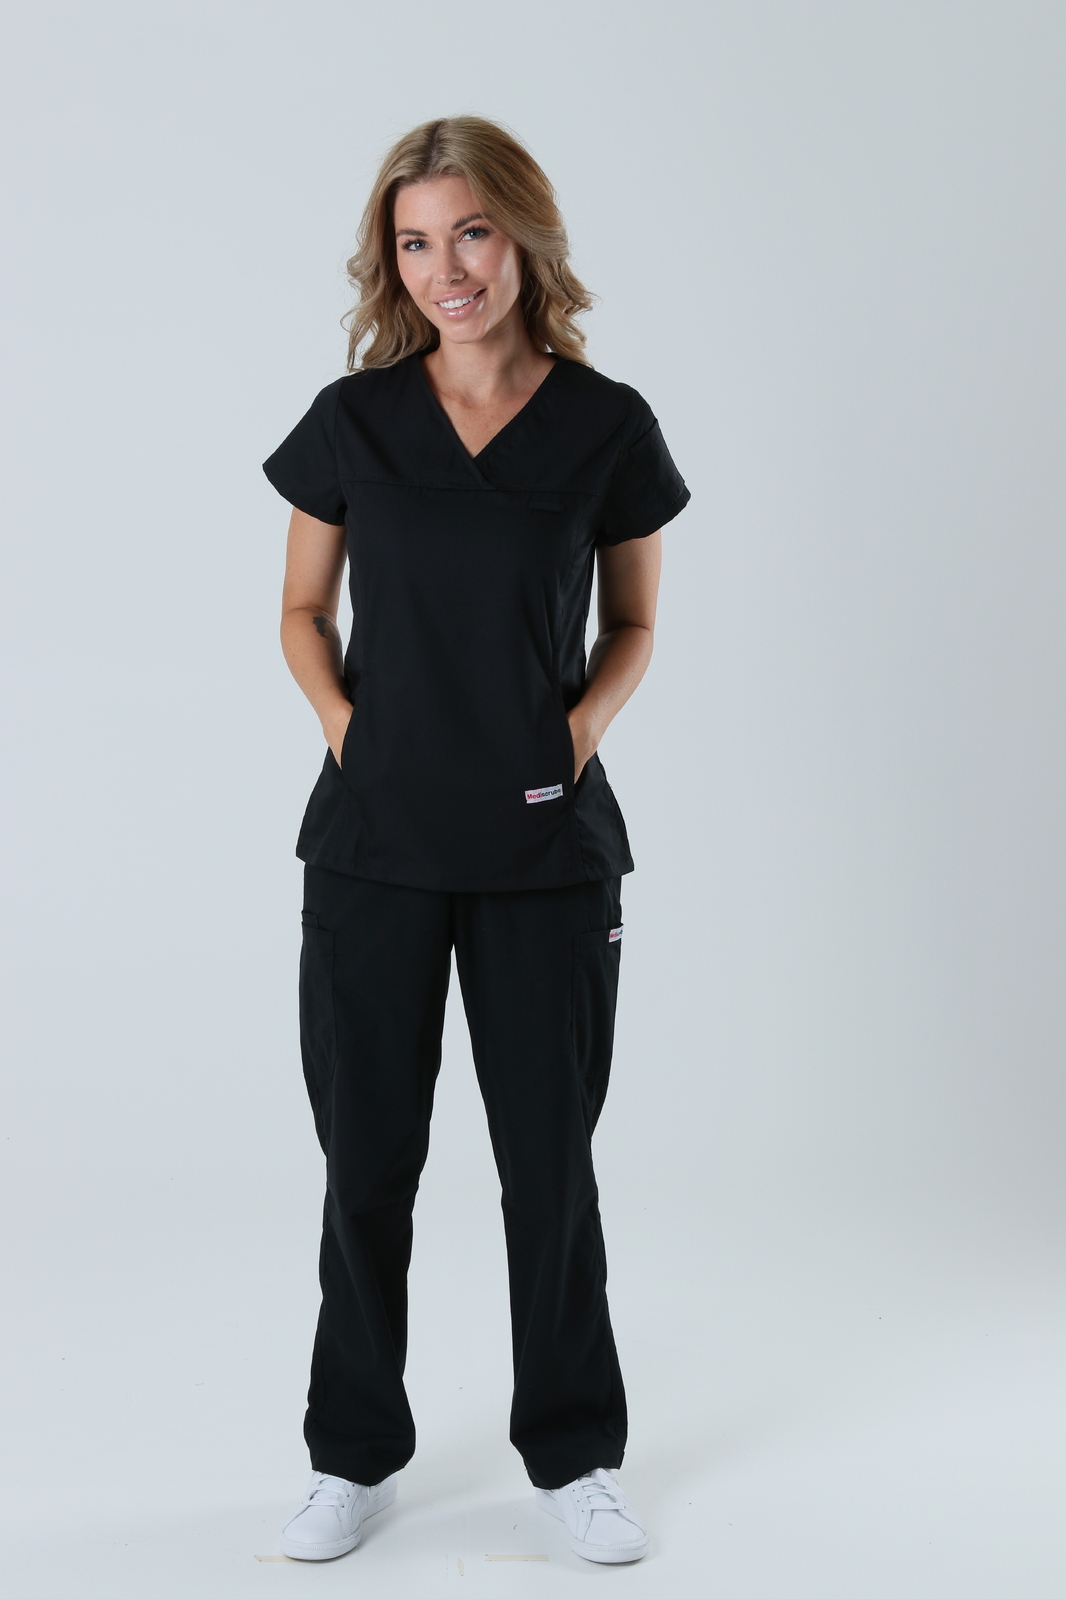 Hopevale Primary Health - CN (Women's Fit Solid Scrub Top and Cargo Pants in Black incl Logos)